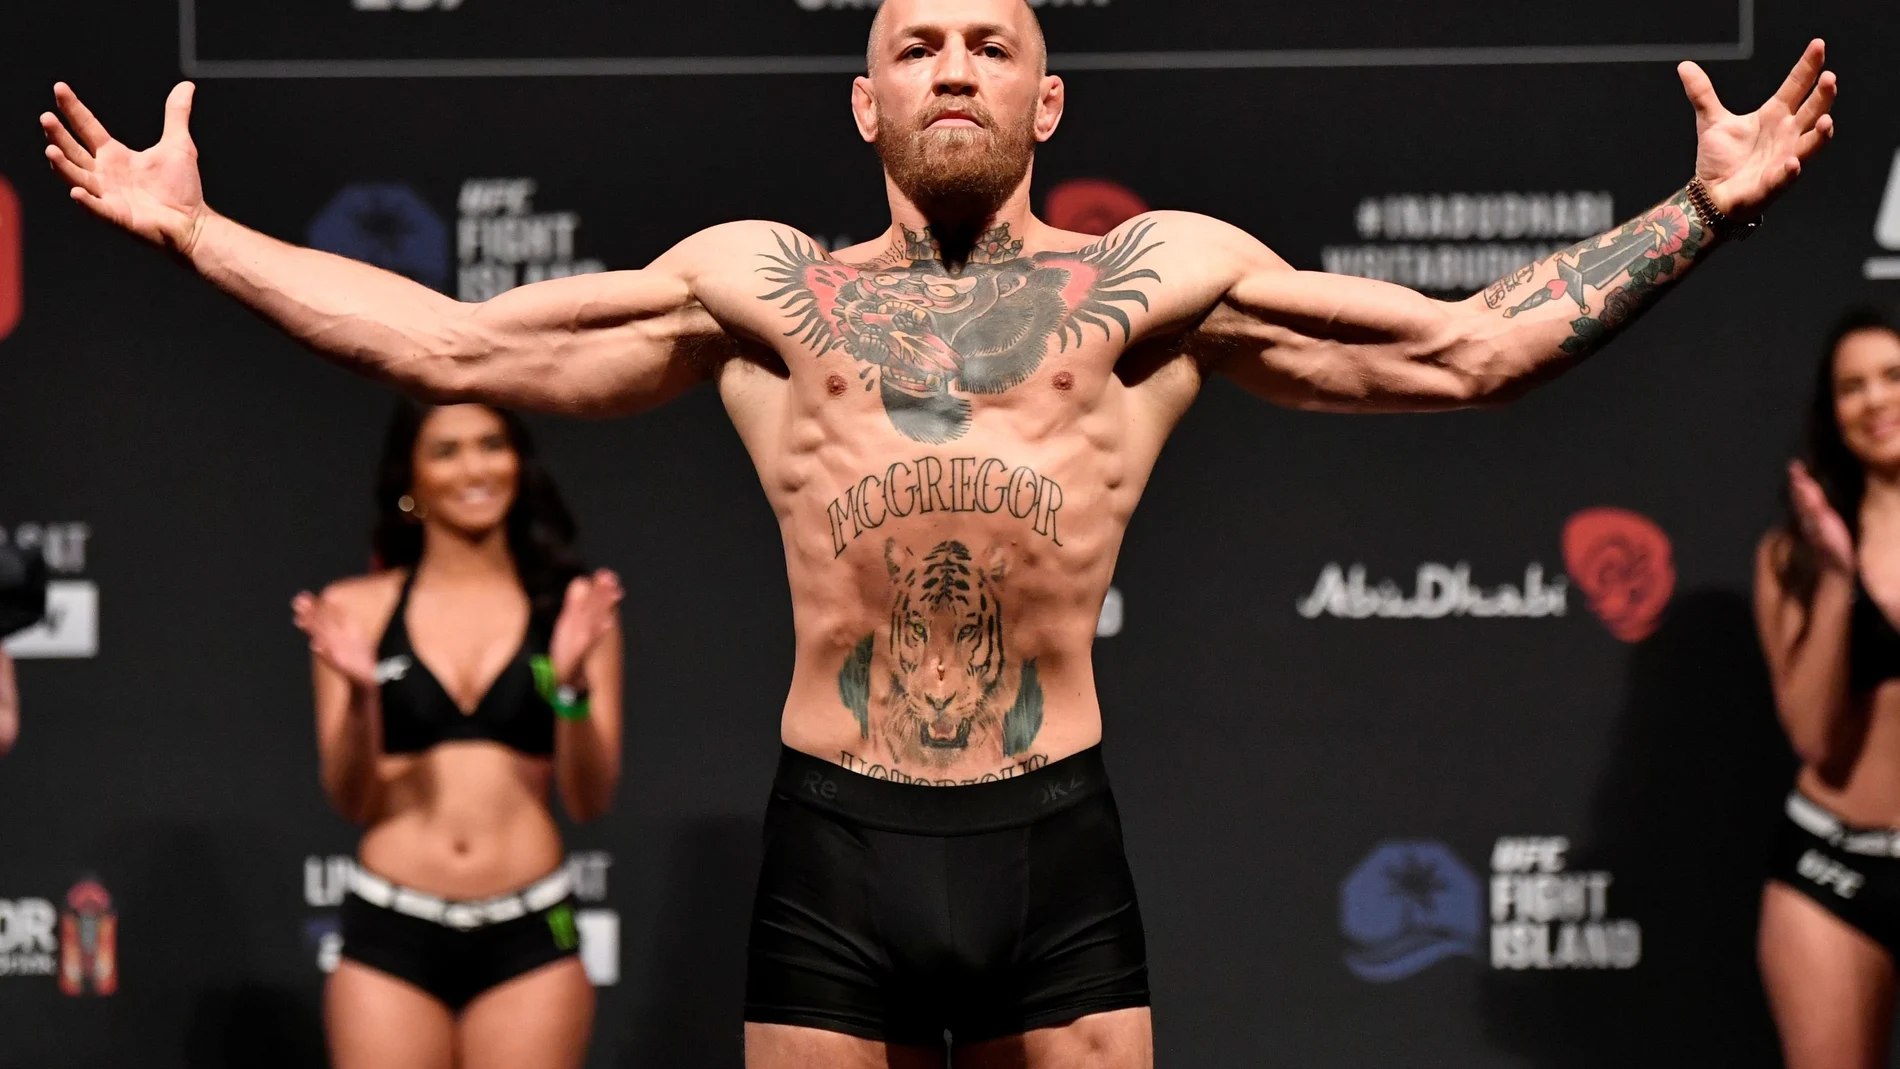 Jan 22, 2021; Abu Dhabi, UNITED ARAB EMIRATES; Conor McGregor of Ireland poses on the scale during the UFC 257 weigh-in at Etihad Arena on UFC Fight Island on January 22, 2021 in Abu Dhabi, United Arab Emirates. Mandatory Credit: Jeff Bottari/Handout Photo via USA TODAY Sports TPX IMAGES OF THE DAY